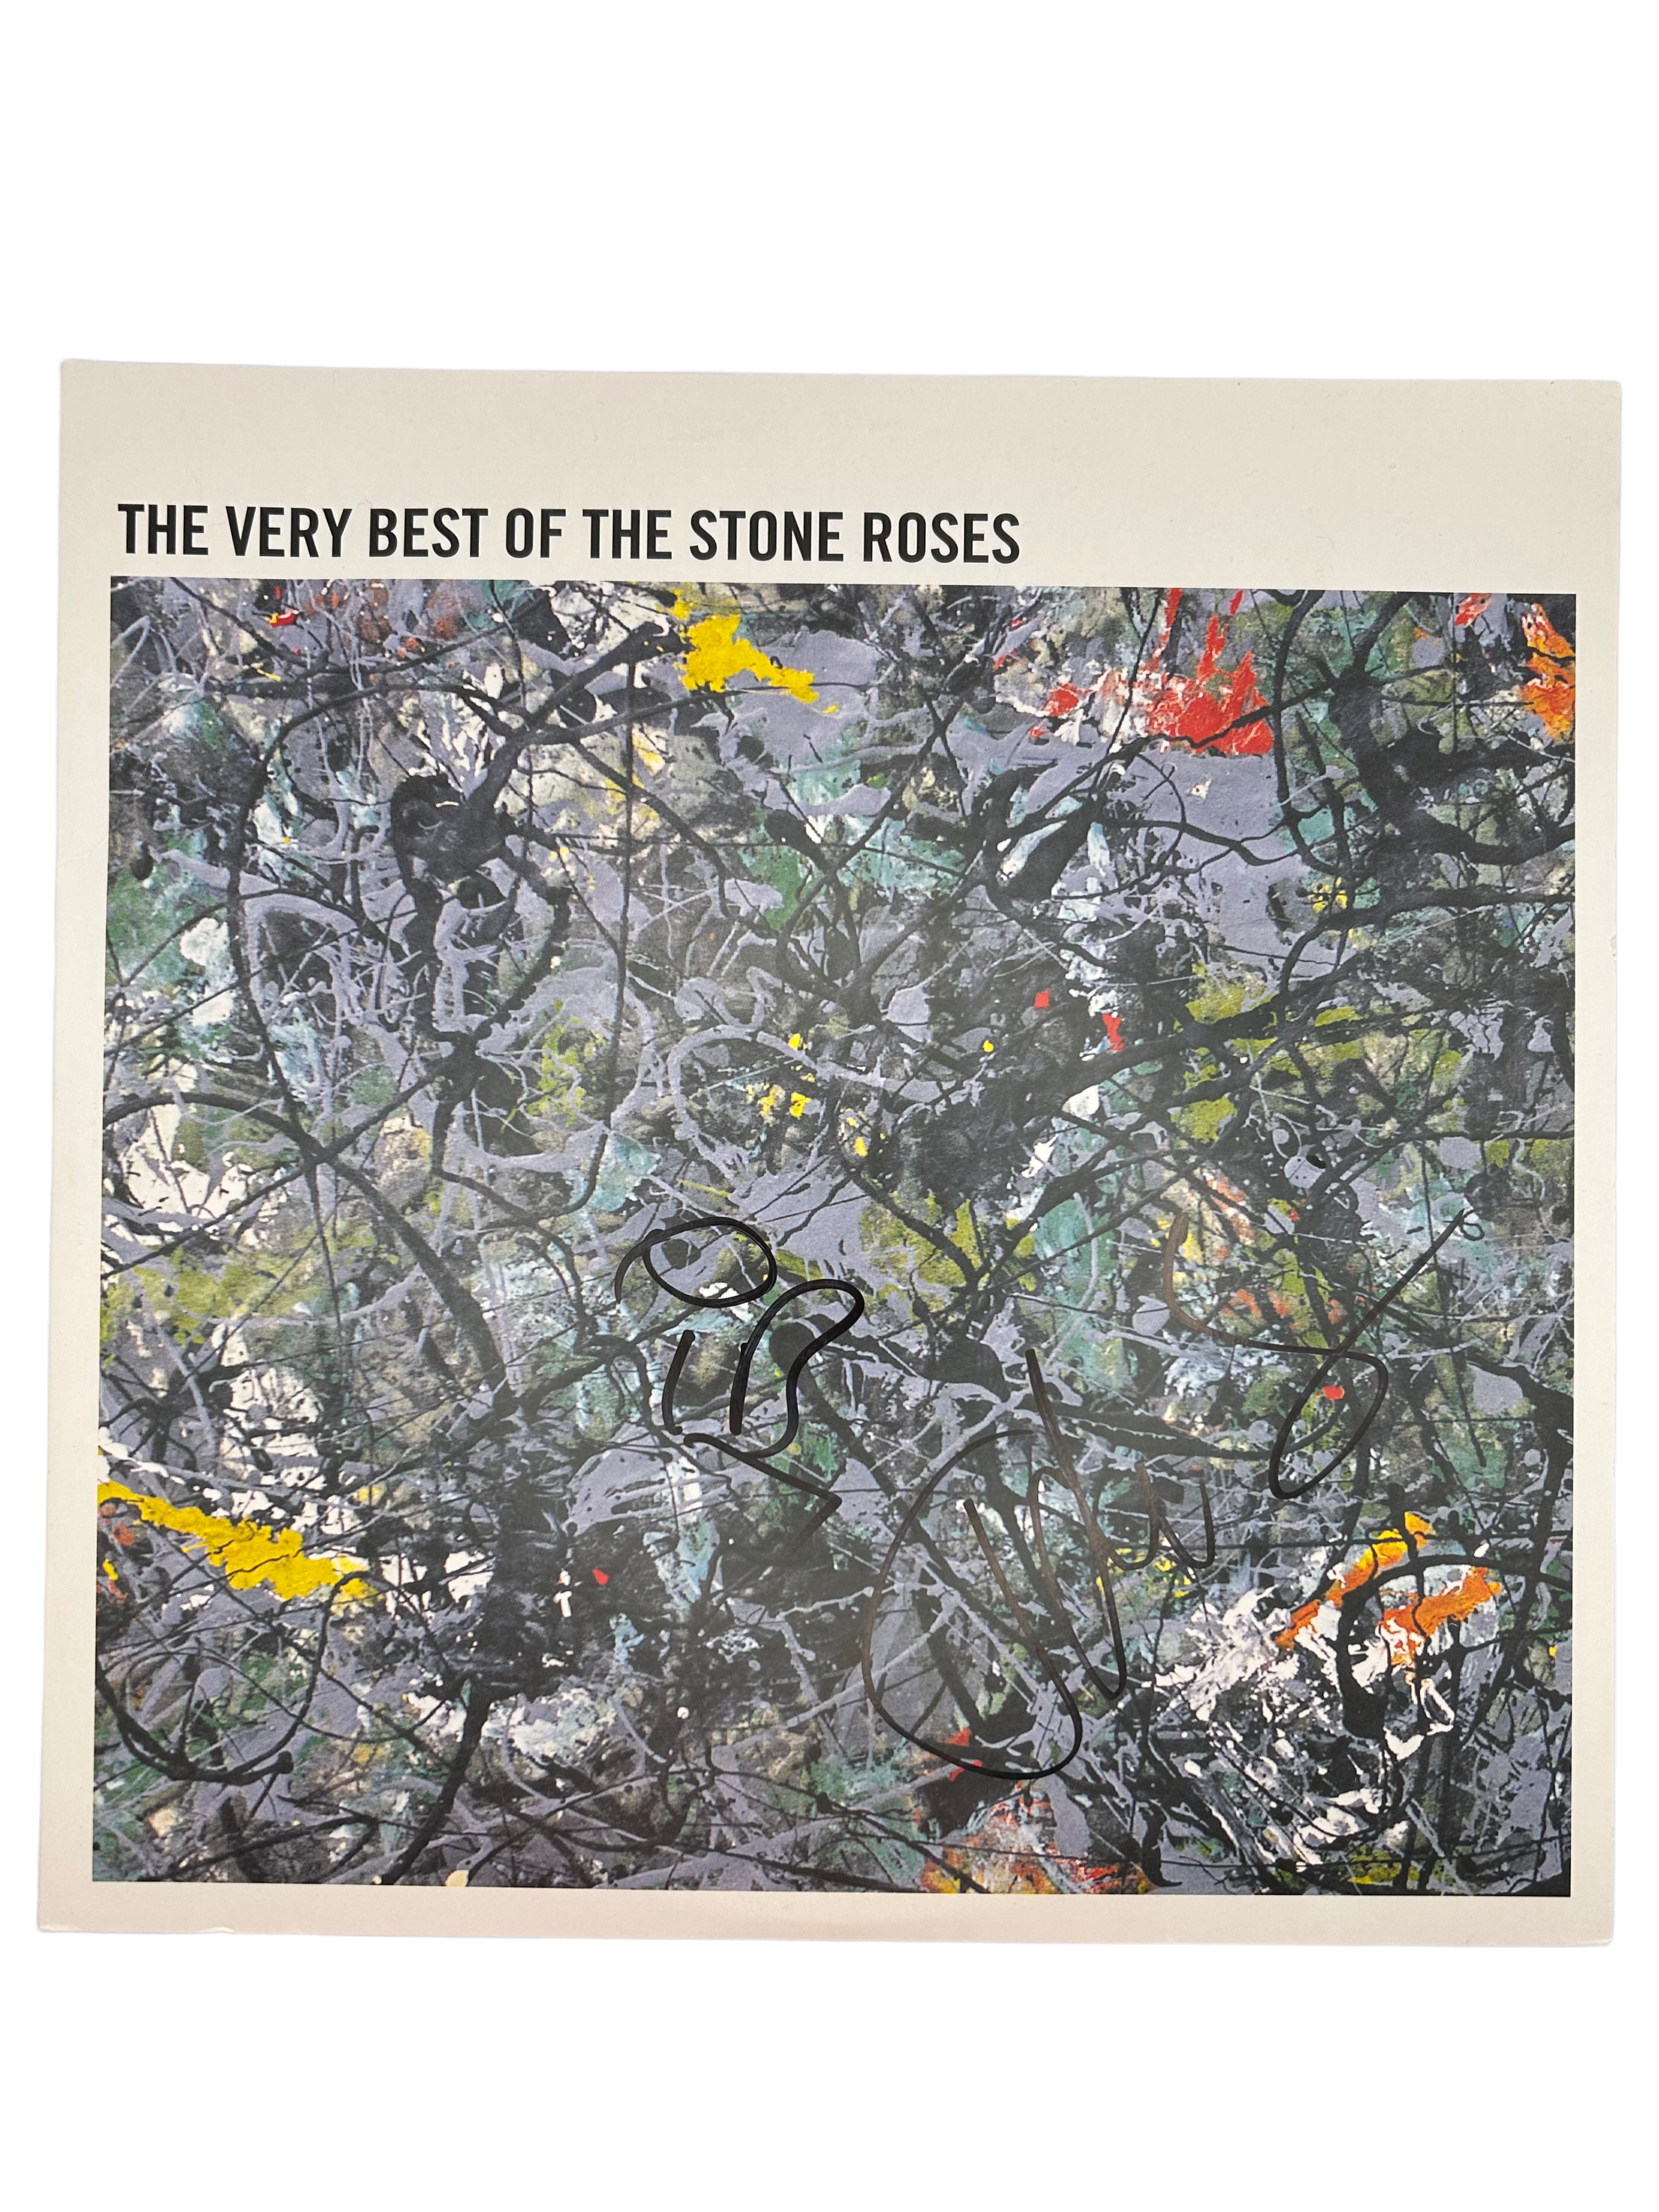 IAN BROWN & JOHN SQUIRE SIGNED THE VERY BEST OF THE STONE ROSES 12” VINYL 3 (AFTAL COA)